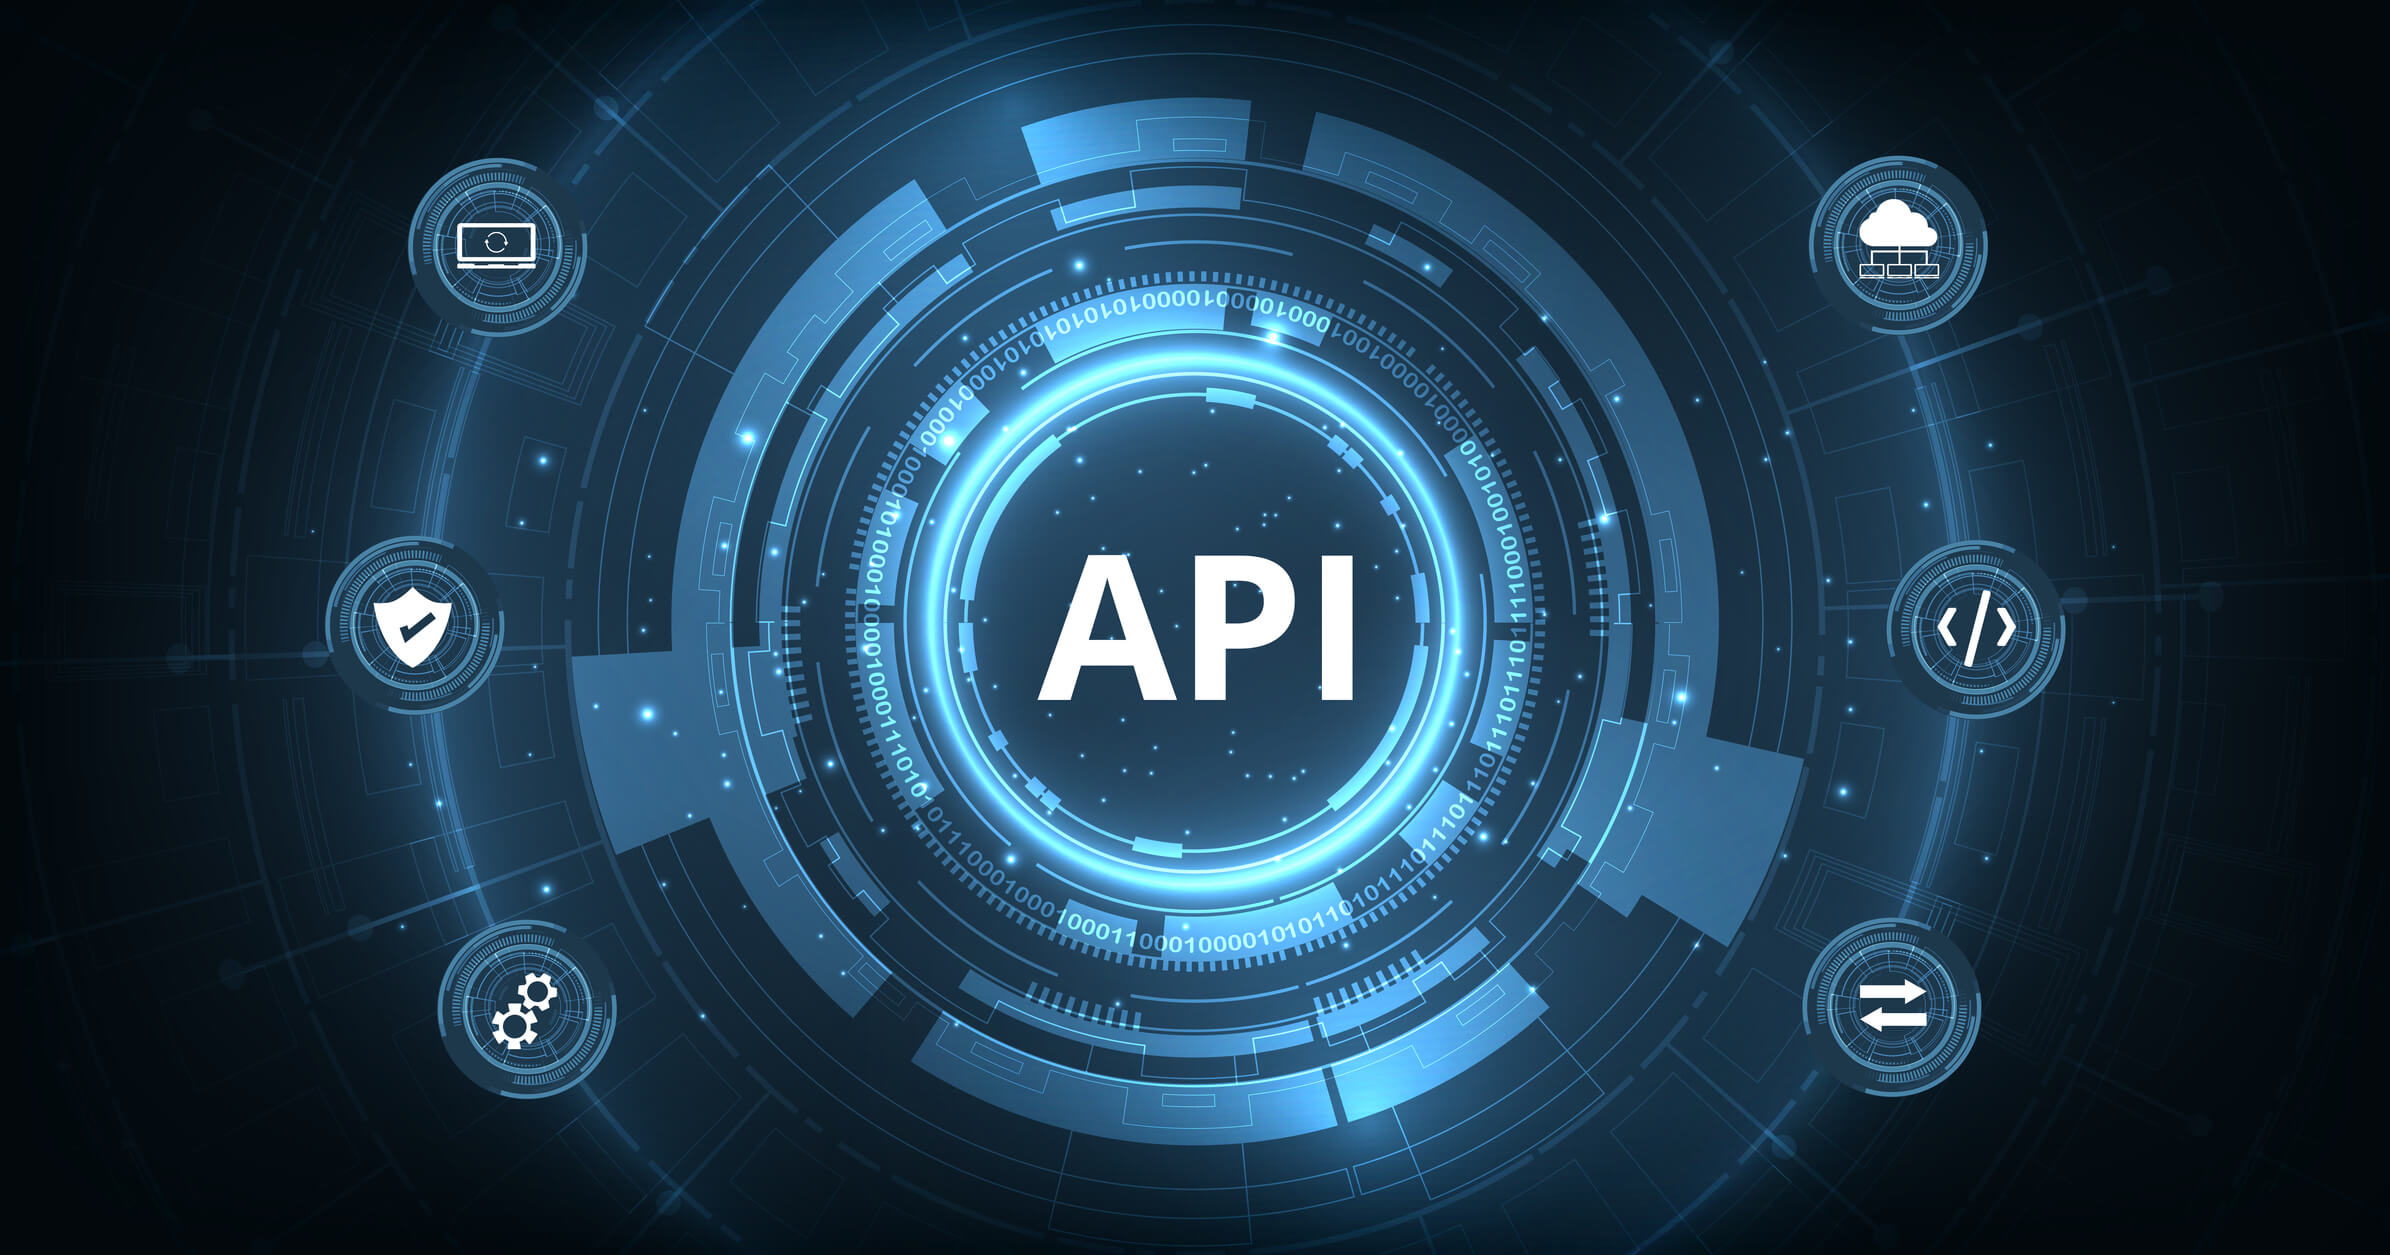 Cloud Payments and API Economy